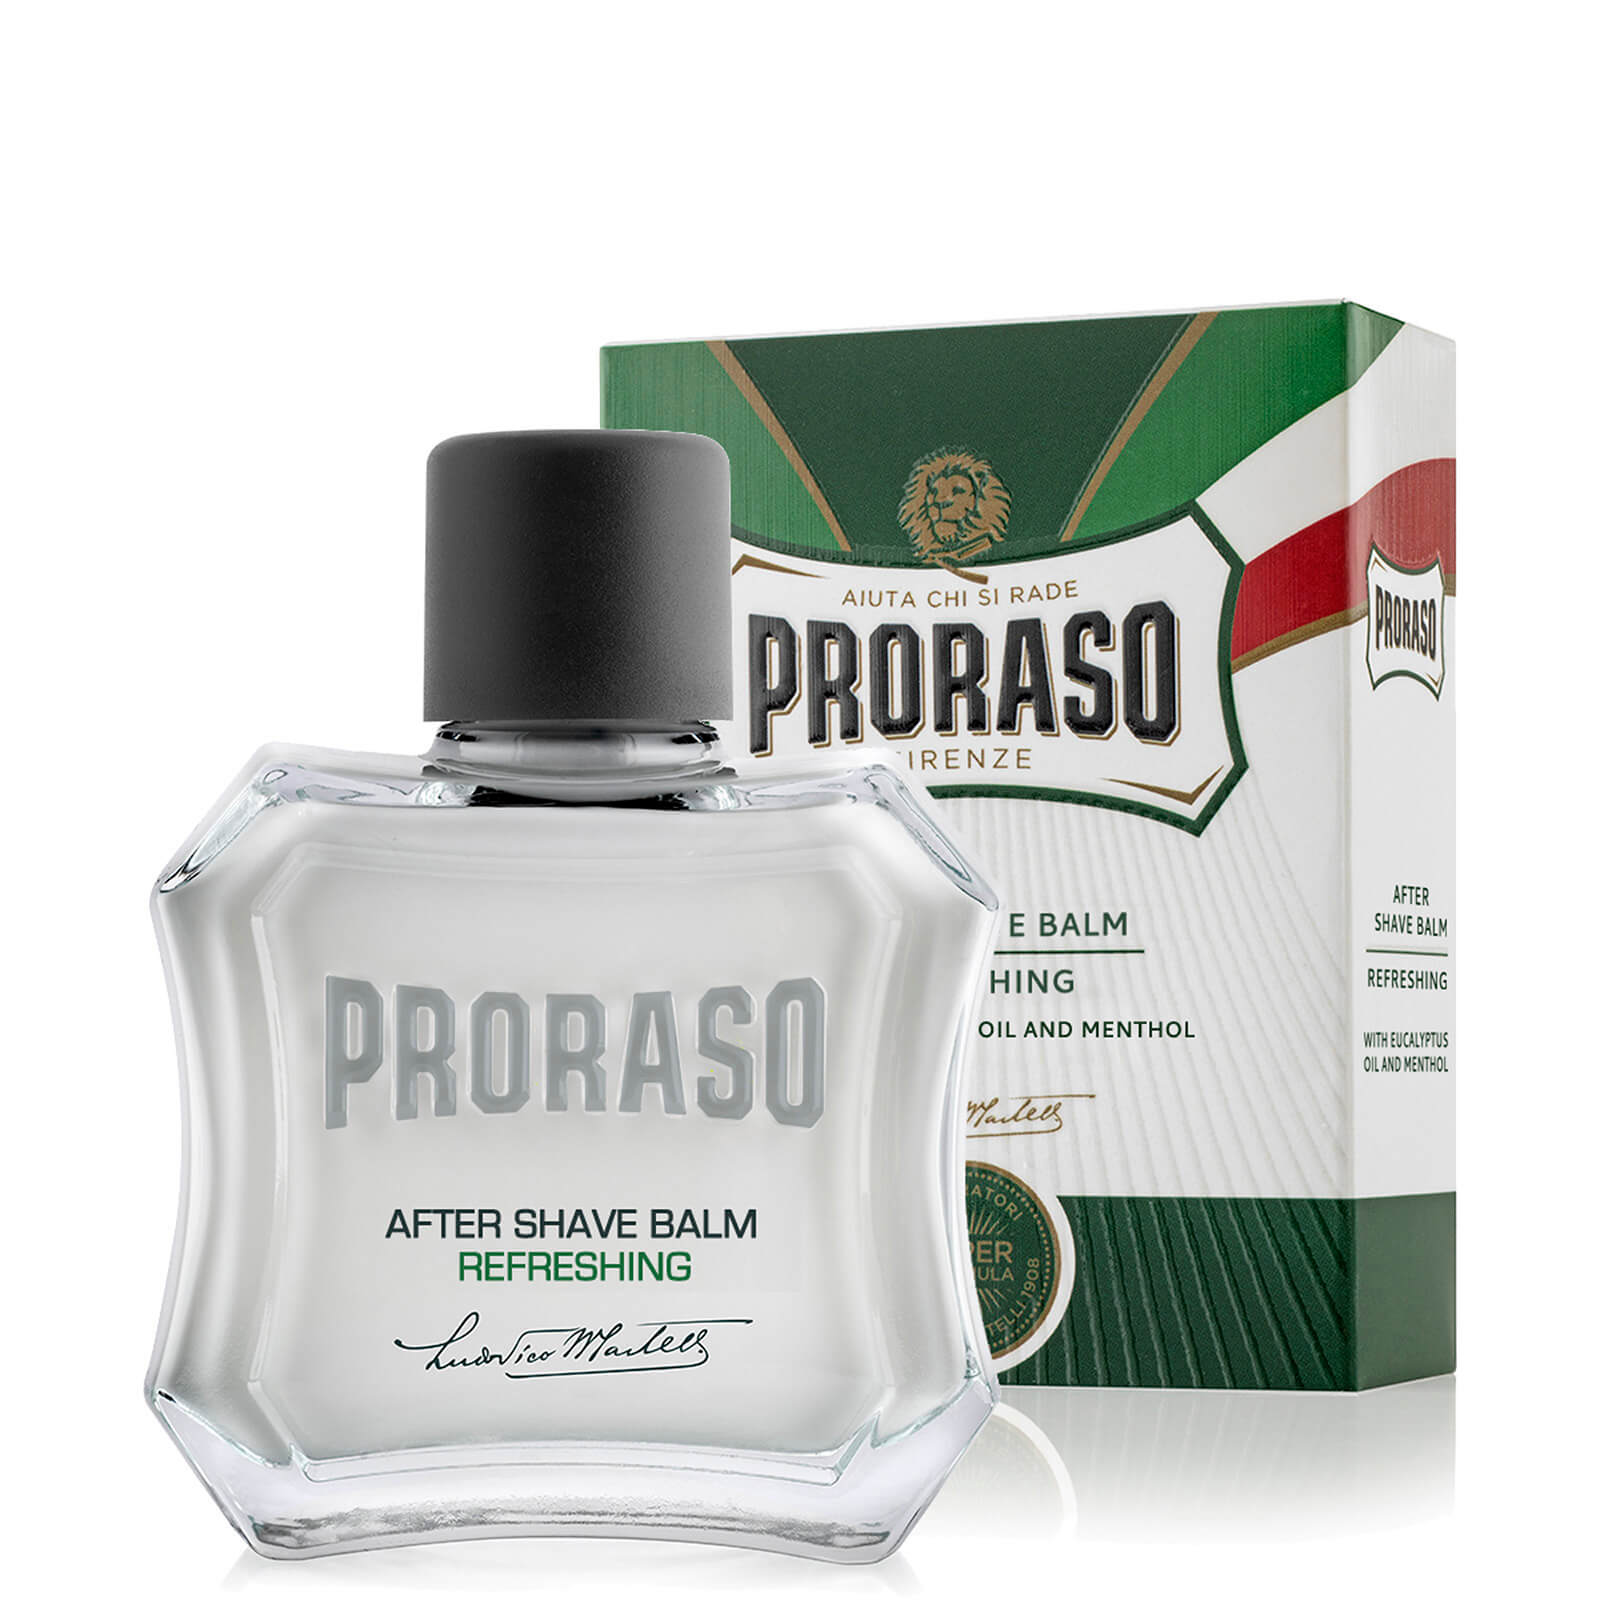 Proraso Refreshing After Shave Balm 100ml lookfantastic.com imagine